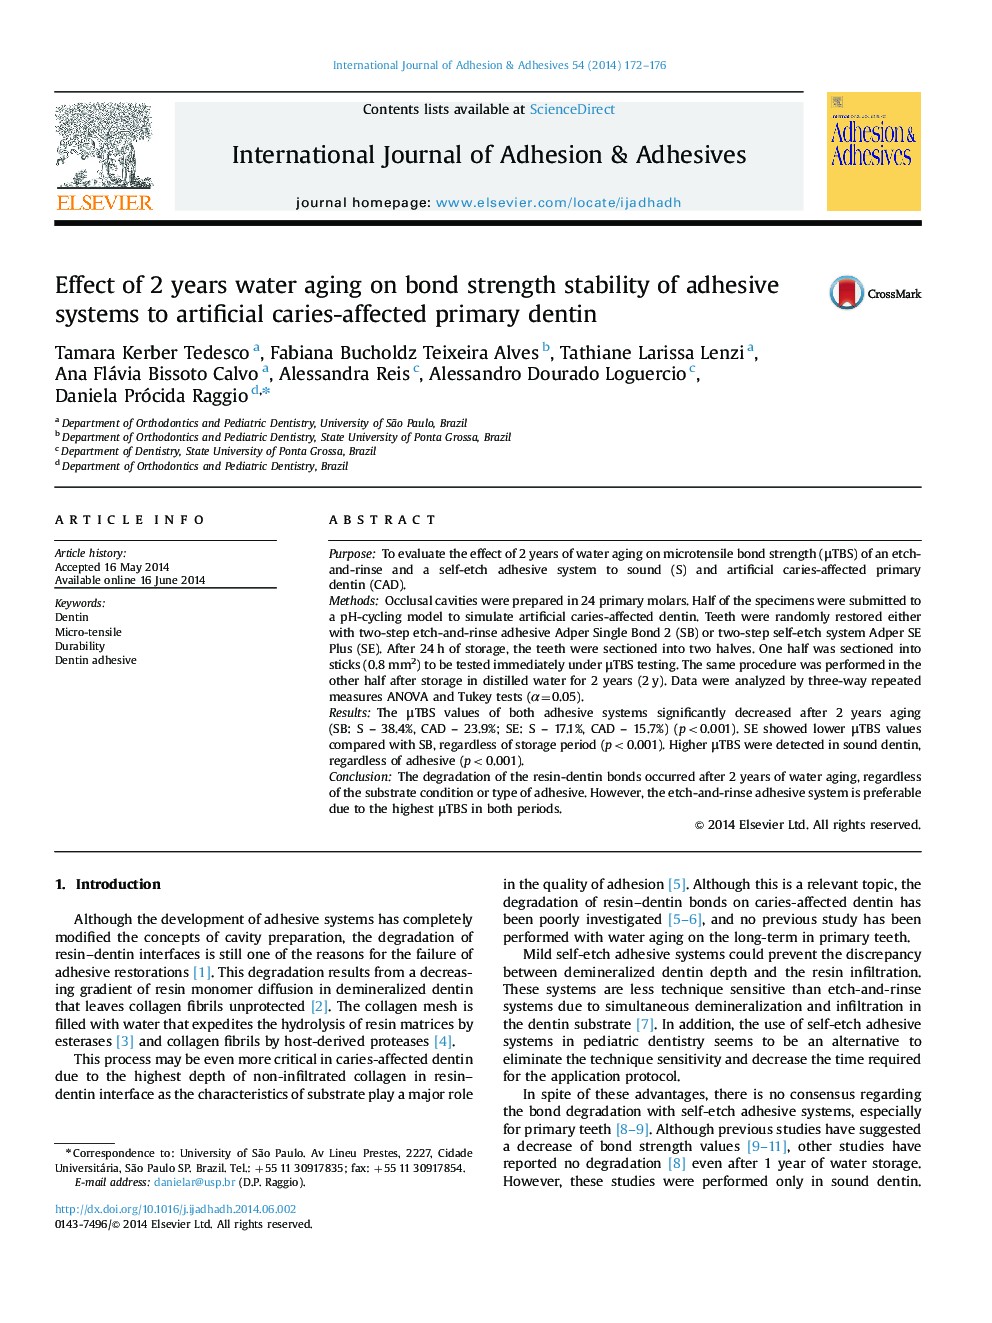 Effect of 2 years water aging on bond strength stability of adhesive systems to artificial caries-affected primary dentin